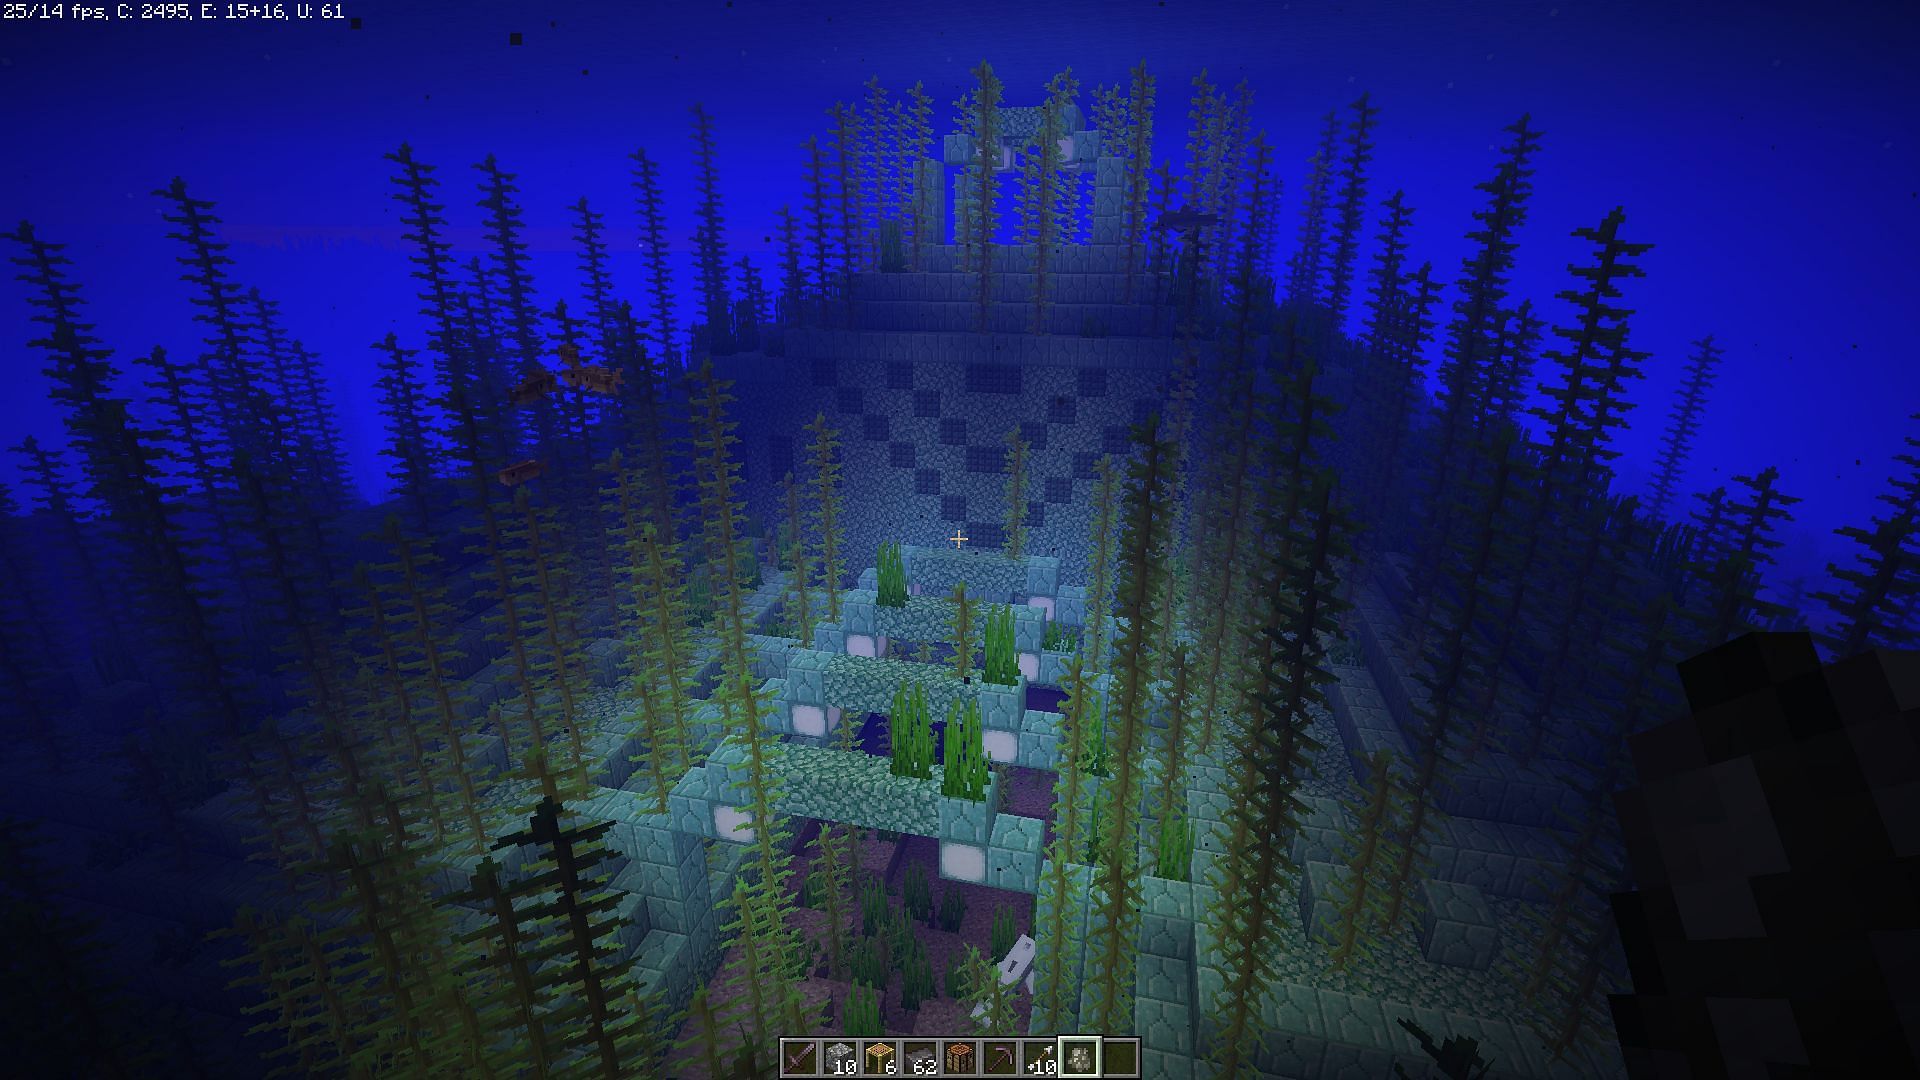 Ocean Monuments is one of the most dangerous structures in Minecraft (Image via Mojang)